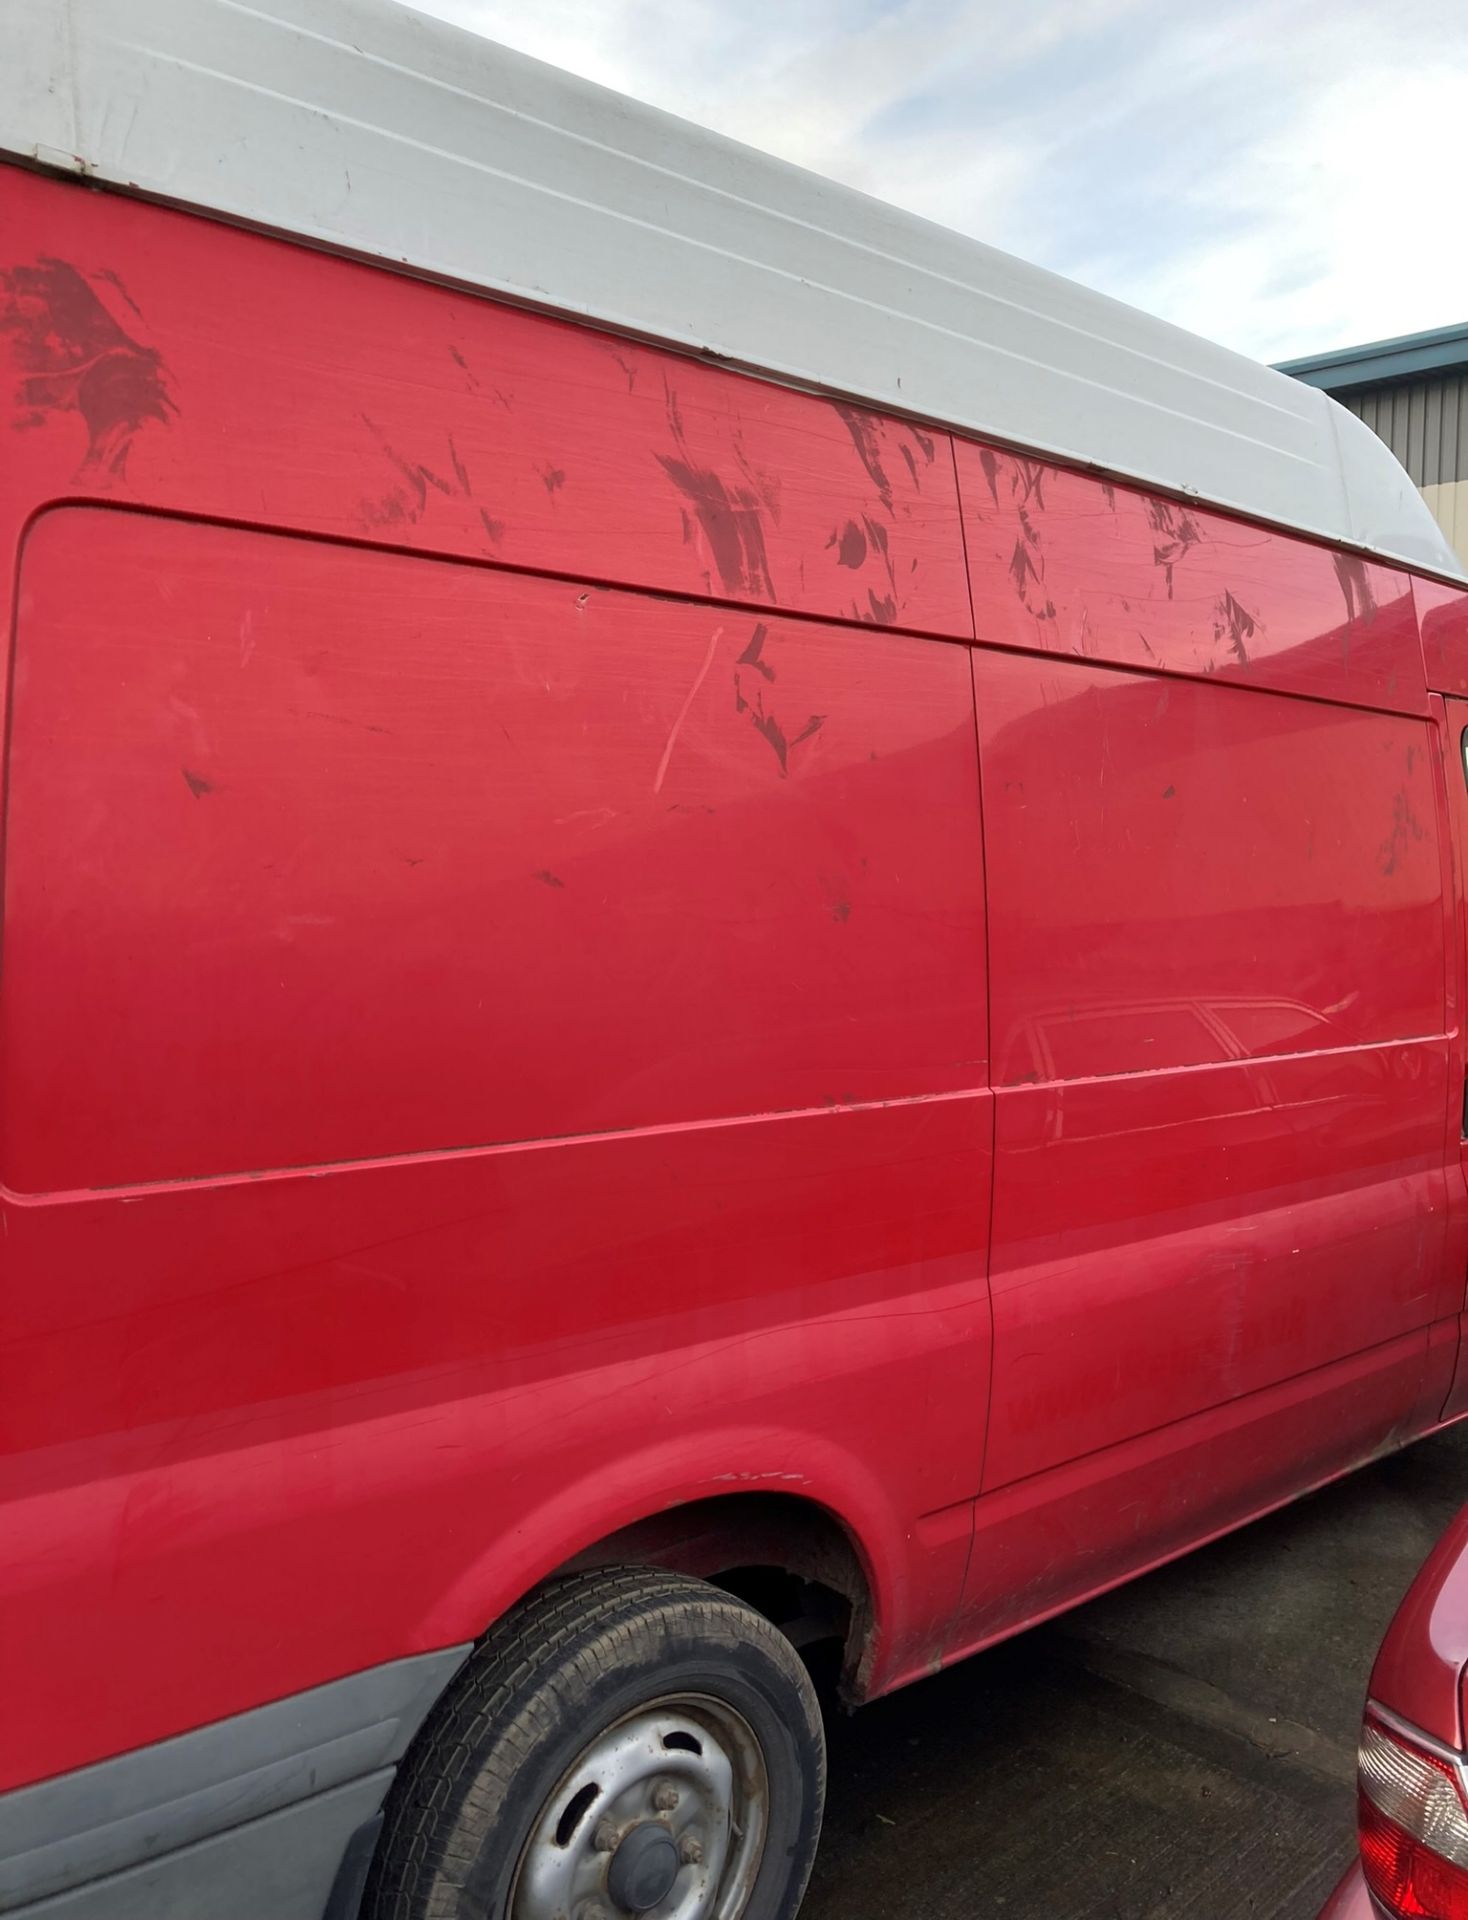 FORD TRANSIT 2.2 110 T300M FWD PANEL VAN - Diesel - Red. On the instructions of: A retained client. - Image 7 of 8